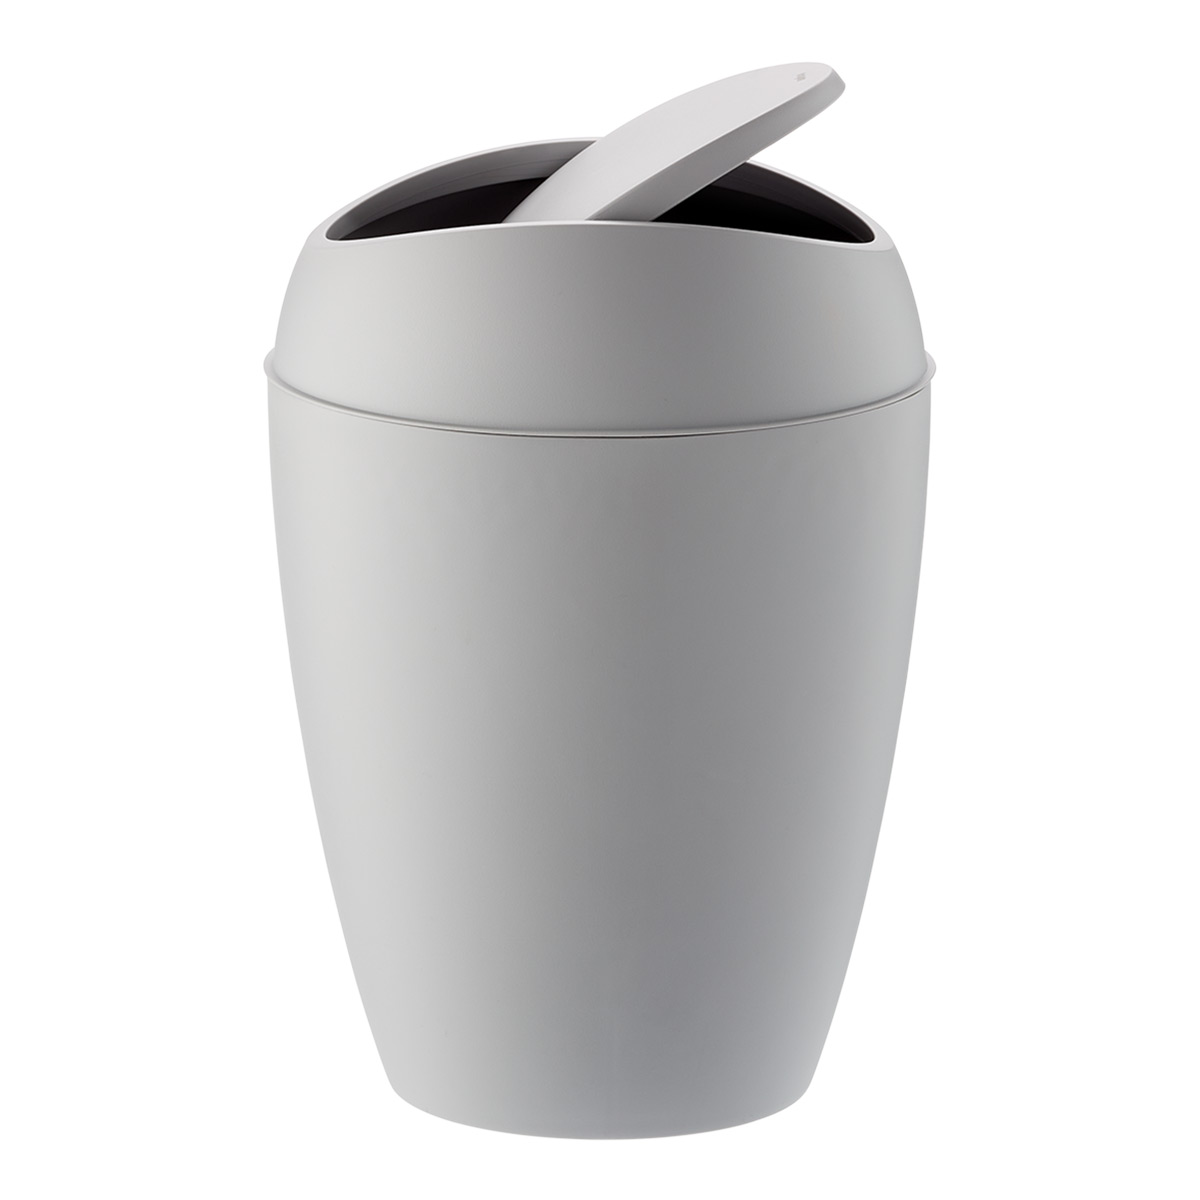 Umbra 2.4 gal/9L Metallic White Twirla Trash Can | The Container Store